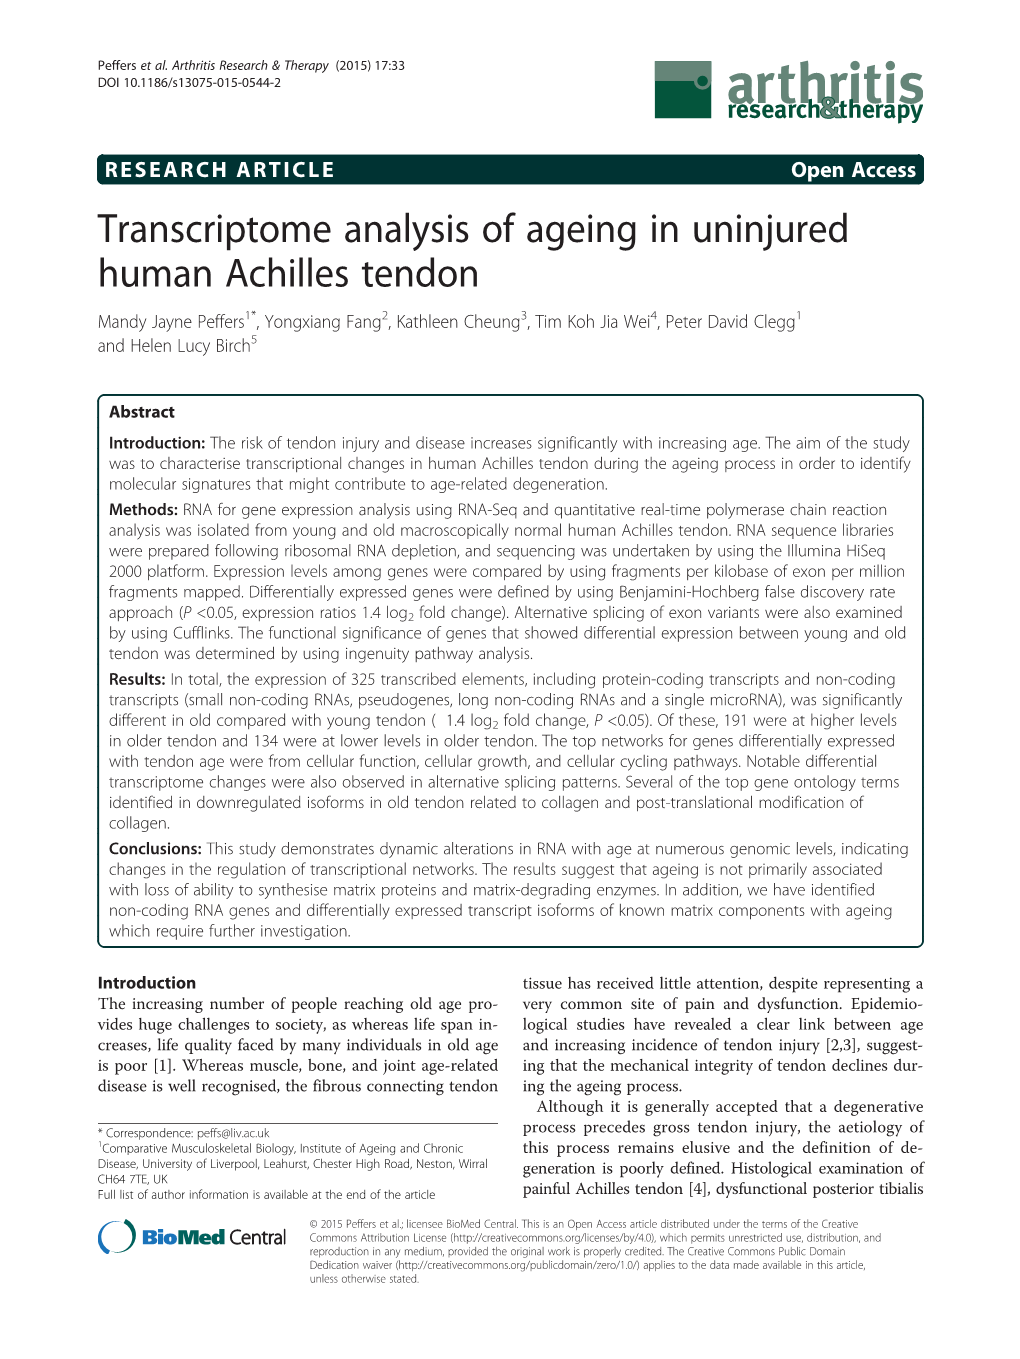 Transcriptome Analysis of Ageing in Uninjured Human Achilles Tendon